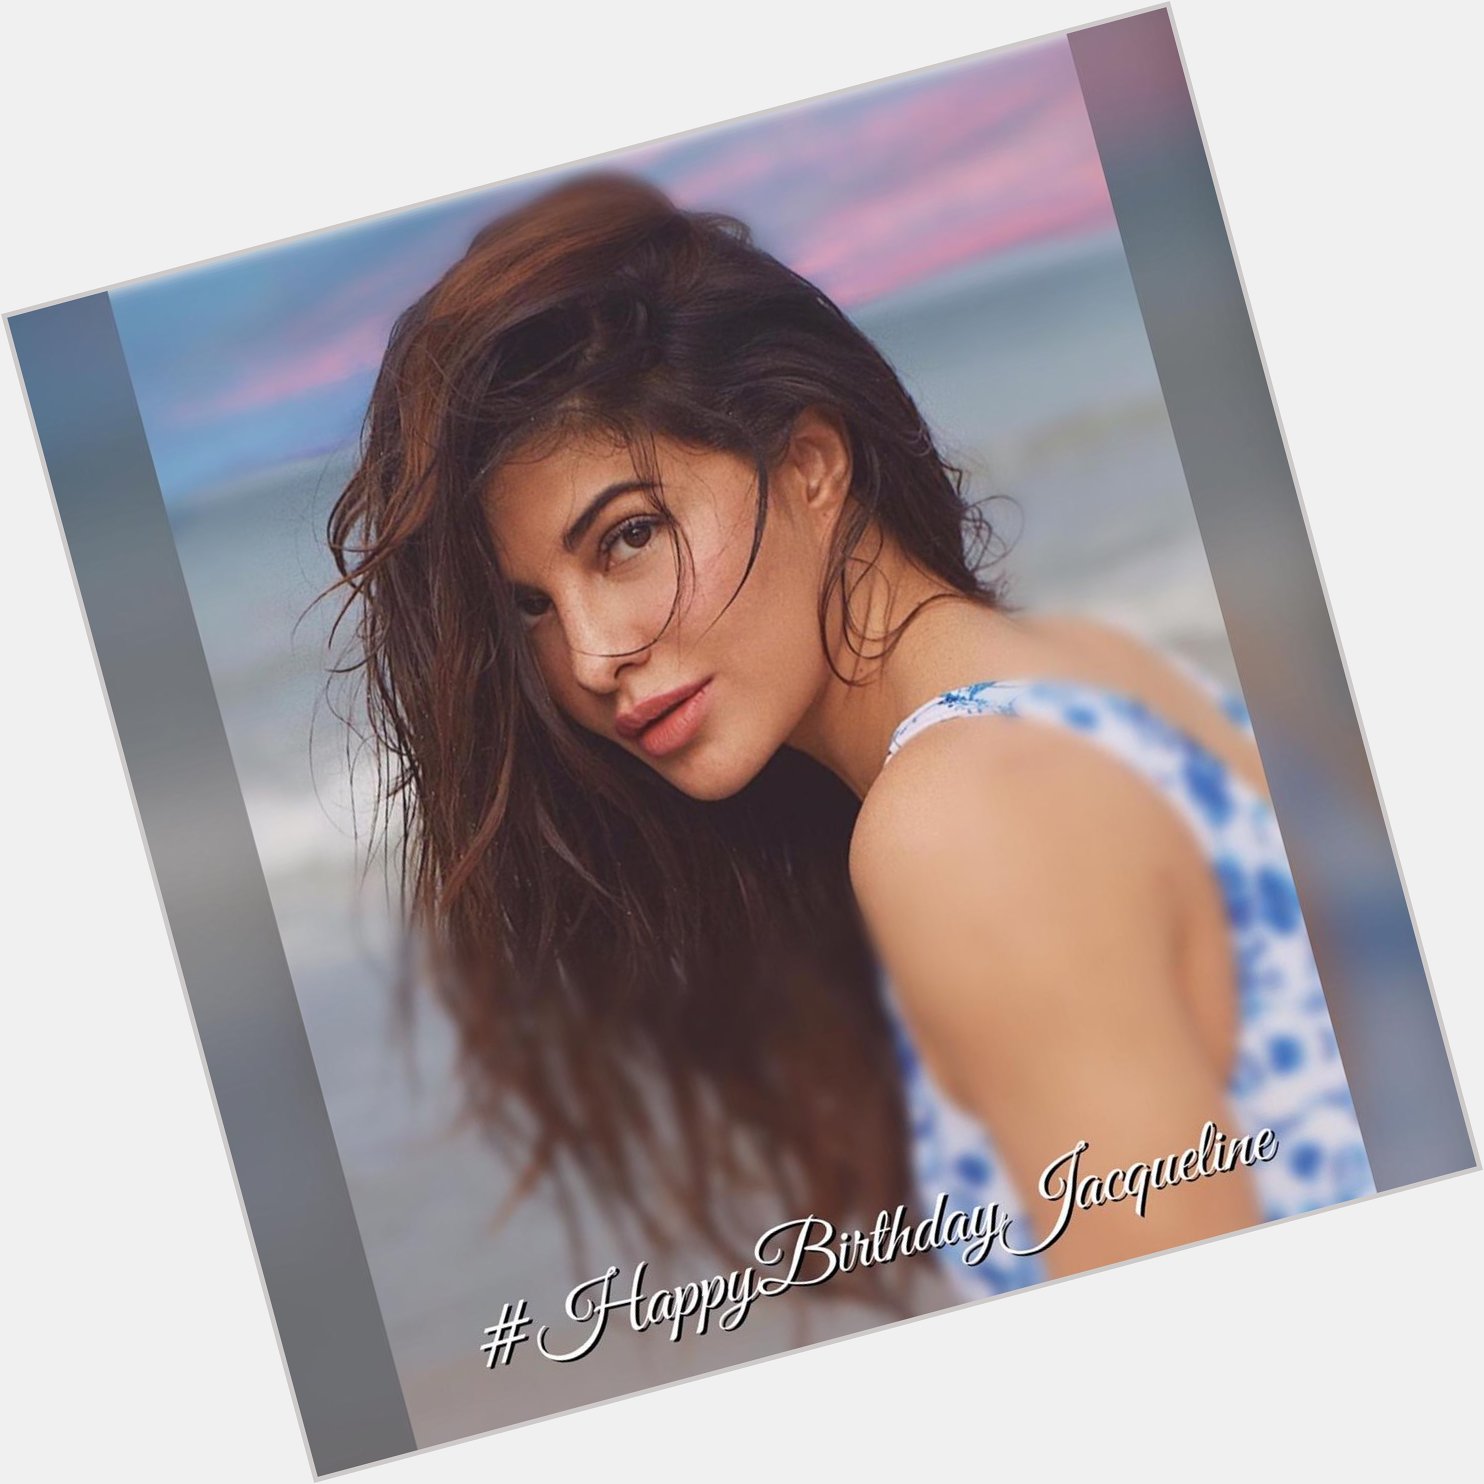 Wishing you a very very happy birthday Jacqueline Fernandez... Sending you lots of love 